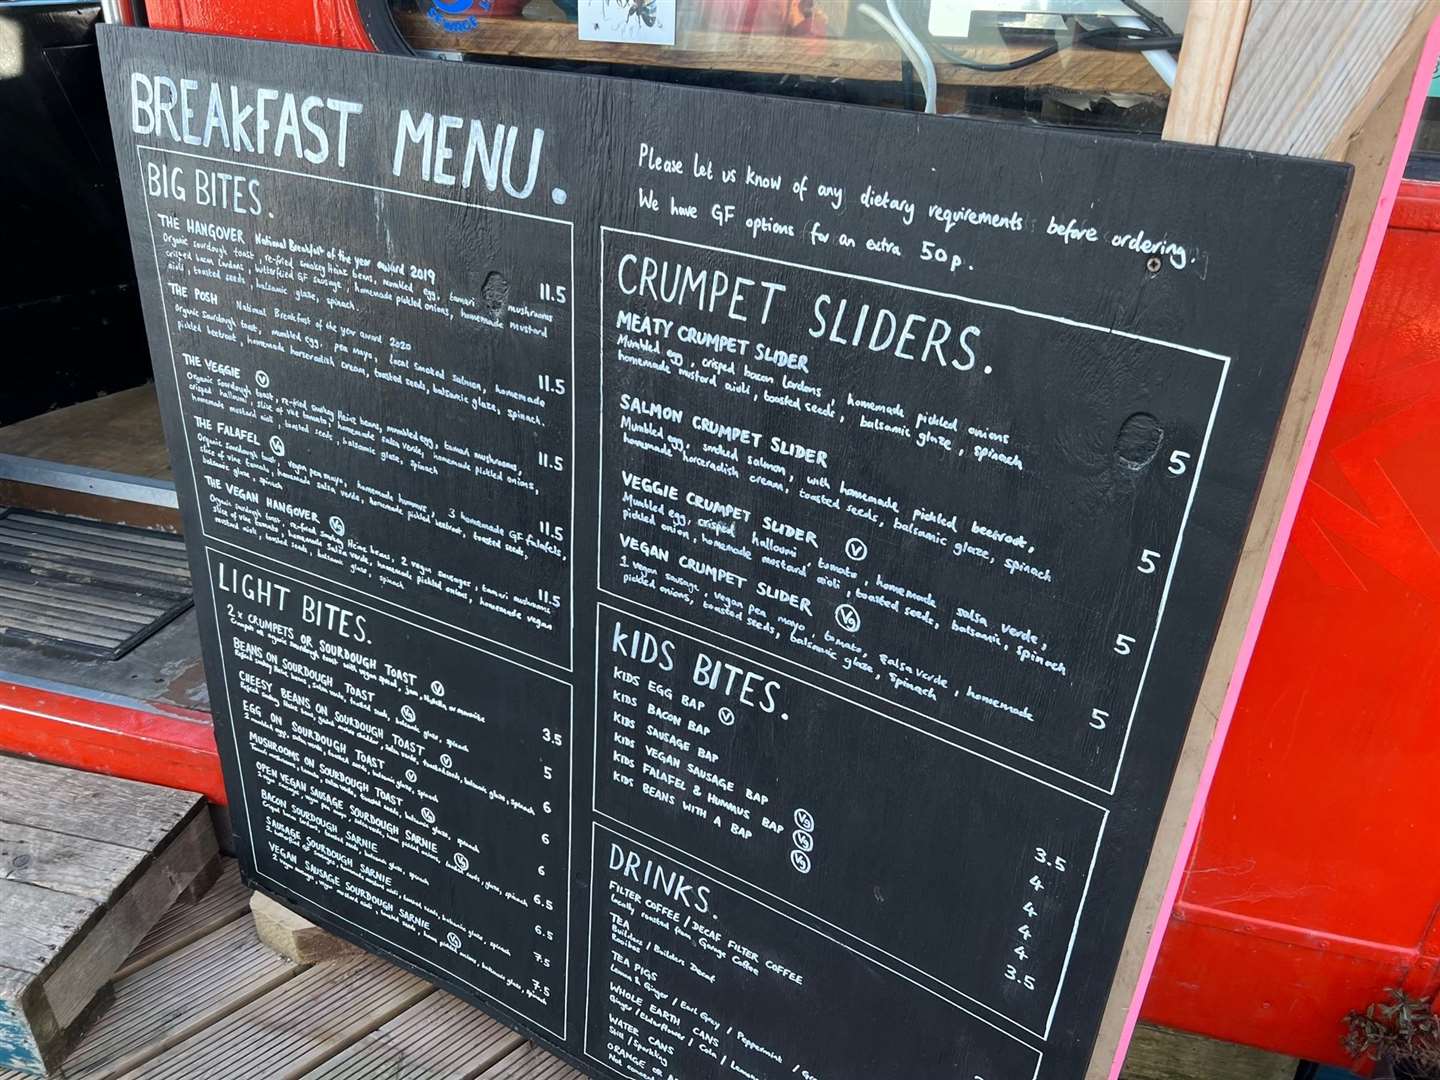 If breakfast is your favourite meal of the day, this is the place for you